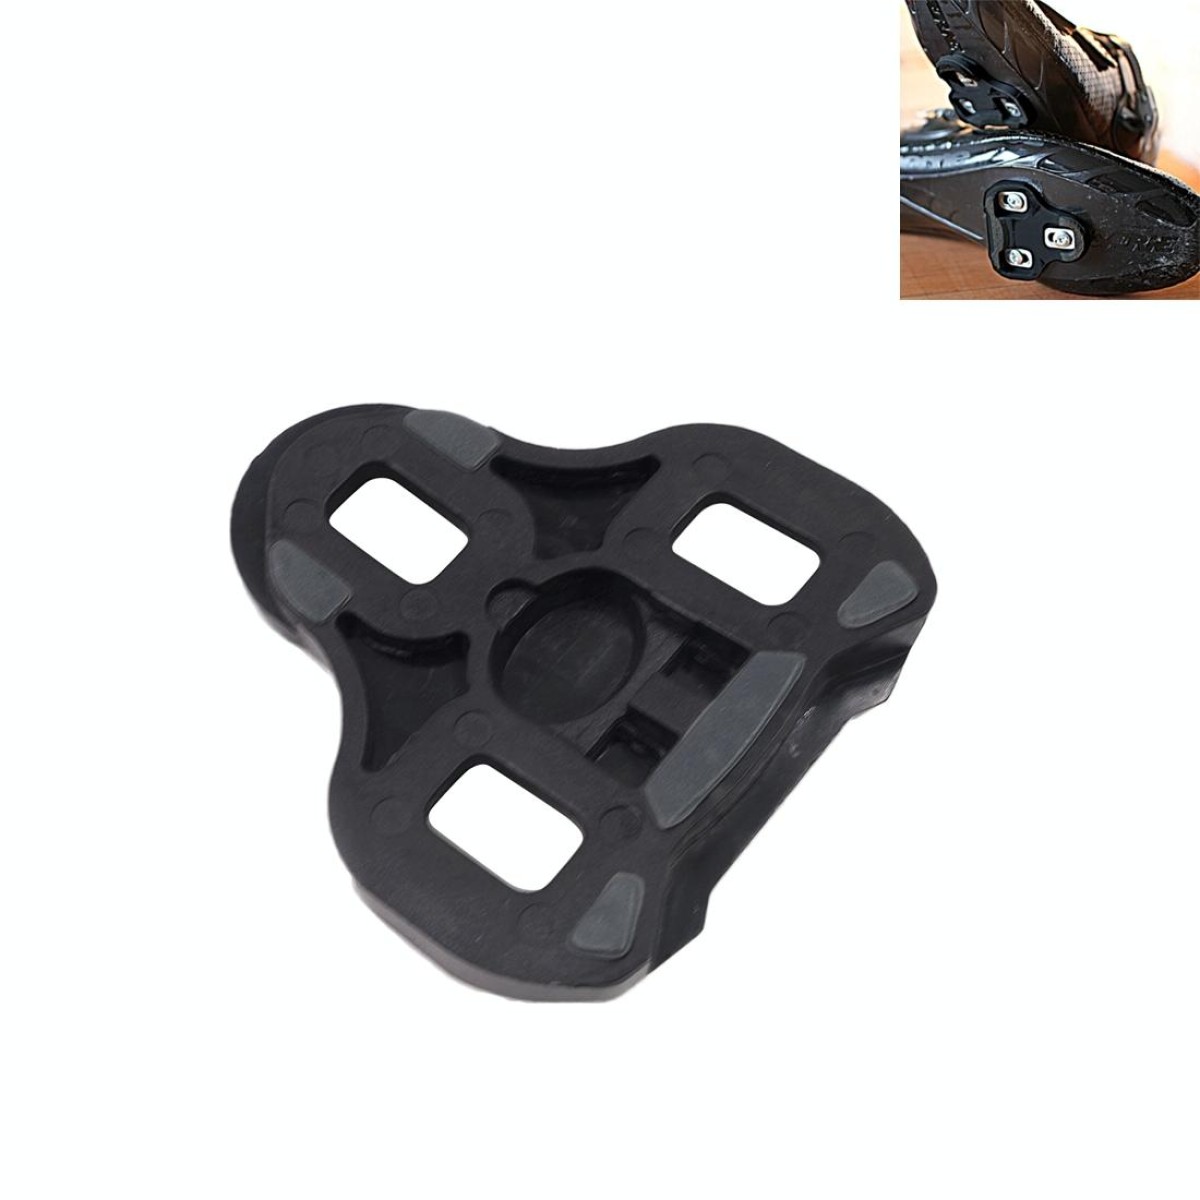 2 PCS RD3-C Road Bike Cleats 6 Degree Float Self-locking Cycling Pedal Cleat for LOOK KEO Road Cleats Fit Most Road Bicycle Shoes(Black)